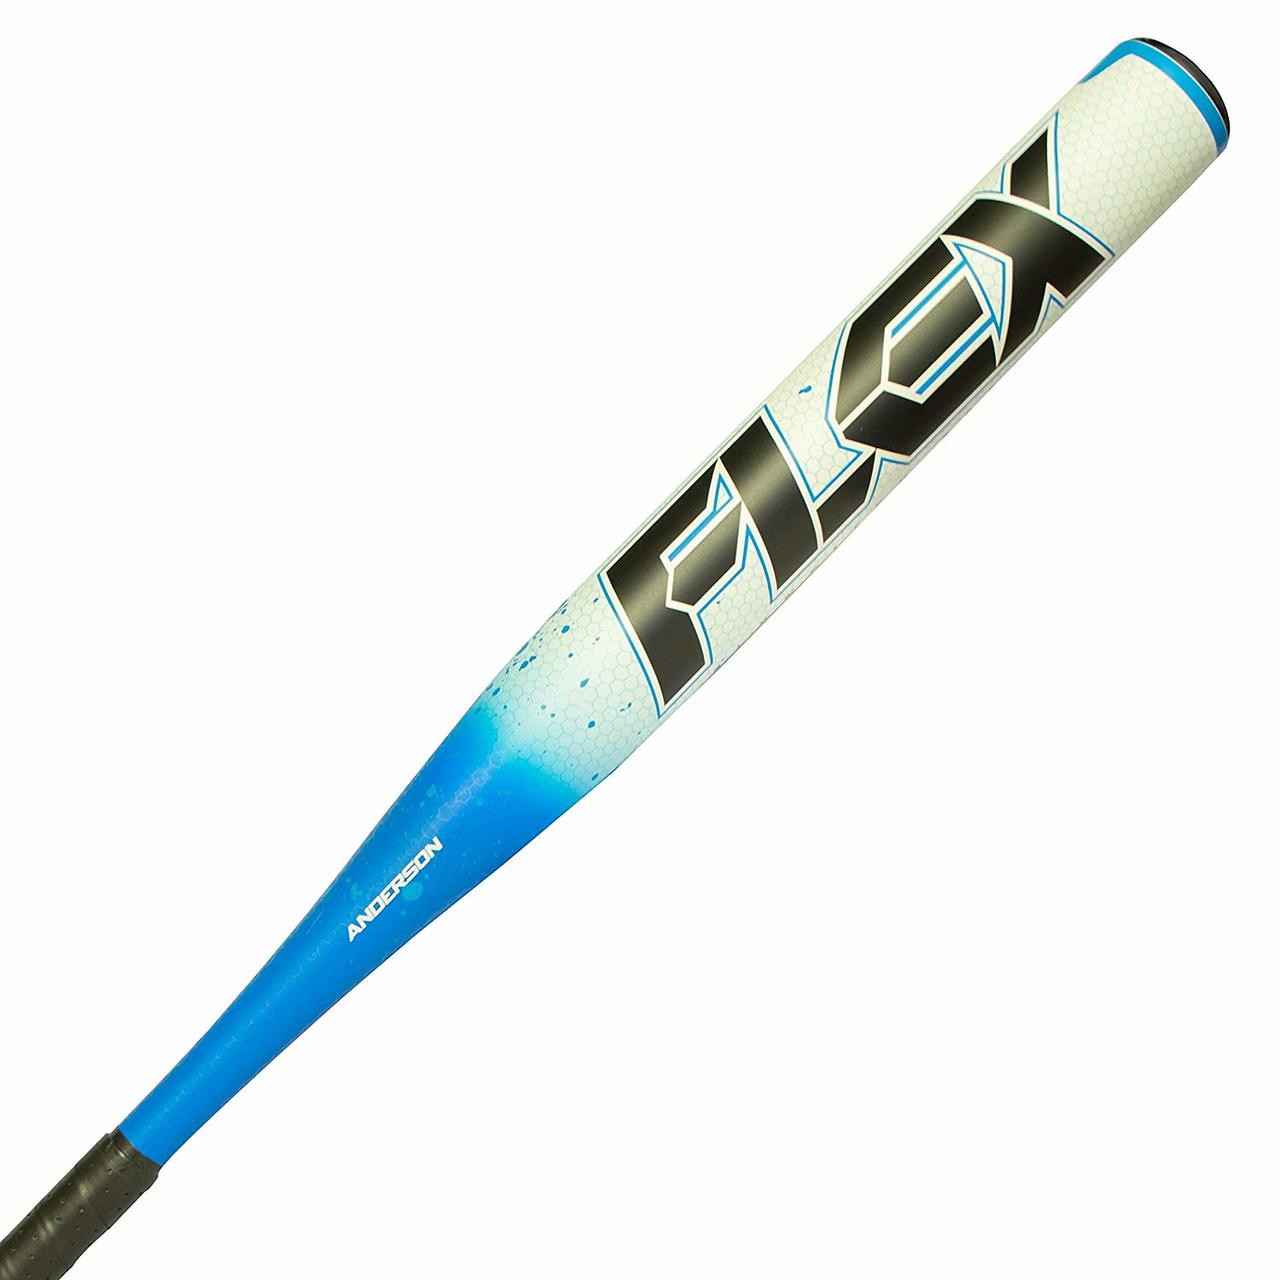 ½ Ounce end load for larger sweet spot and One-piece single wall, all aerospace alloy material Meets BPF 1.20 Standards Approved by all major softball associations including: ASA, USSSA, NSA, ISA Manufactures Warranty: 1 Year against manufacture defects